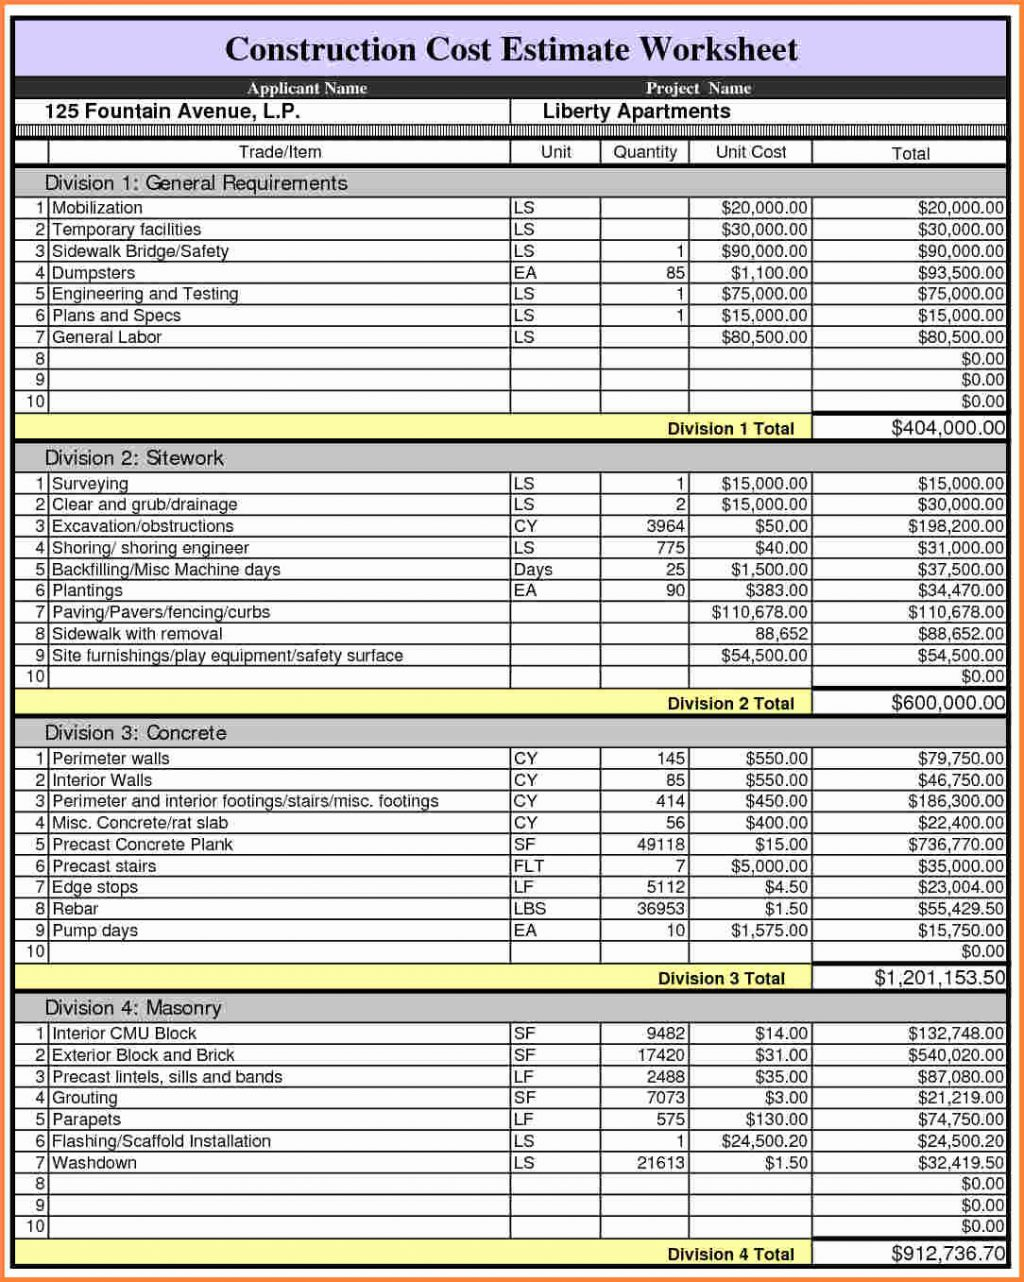 Construction Job Costing Spreadsheet Free inside Construction Job Costing Spreadsheet 2018 Budget Spreadsheet Excel